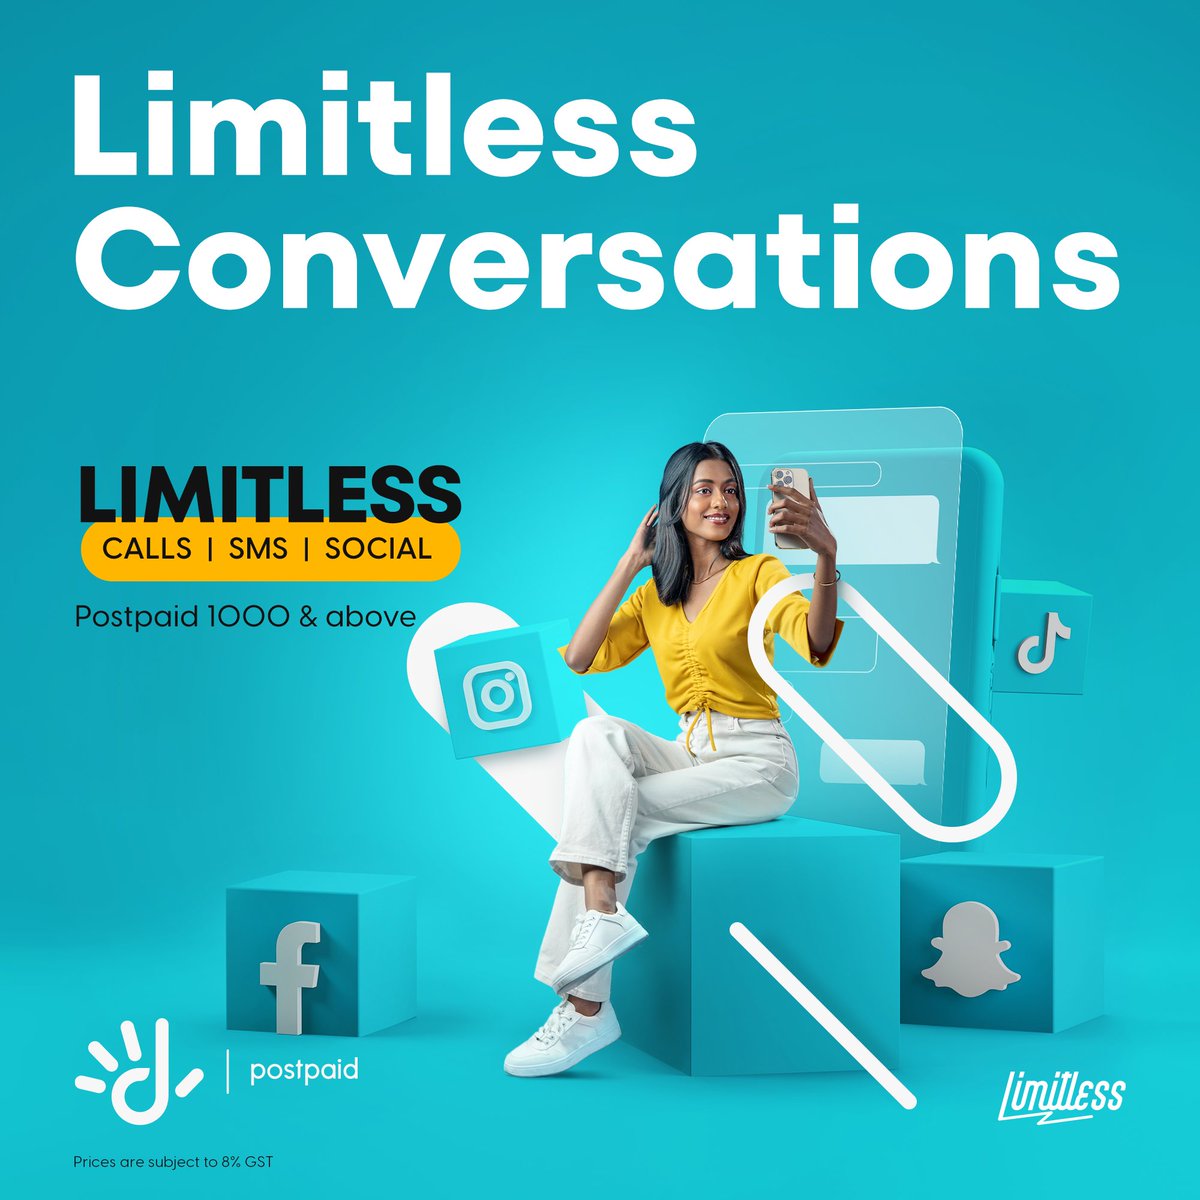 Go Limitless with Dhiraagu Postpaid! 😍 Get Limitless Social Media, Limitless Calls & Limitless SMS with Dhiraagu Postpaid 1000 and above. Upgrade now from Dhiraagu App 👉🏽 bit.ly/Dhiraagu-App #LimitlessWithDhiraagu